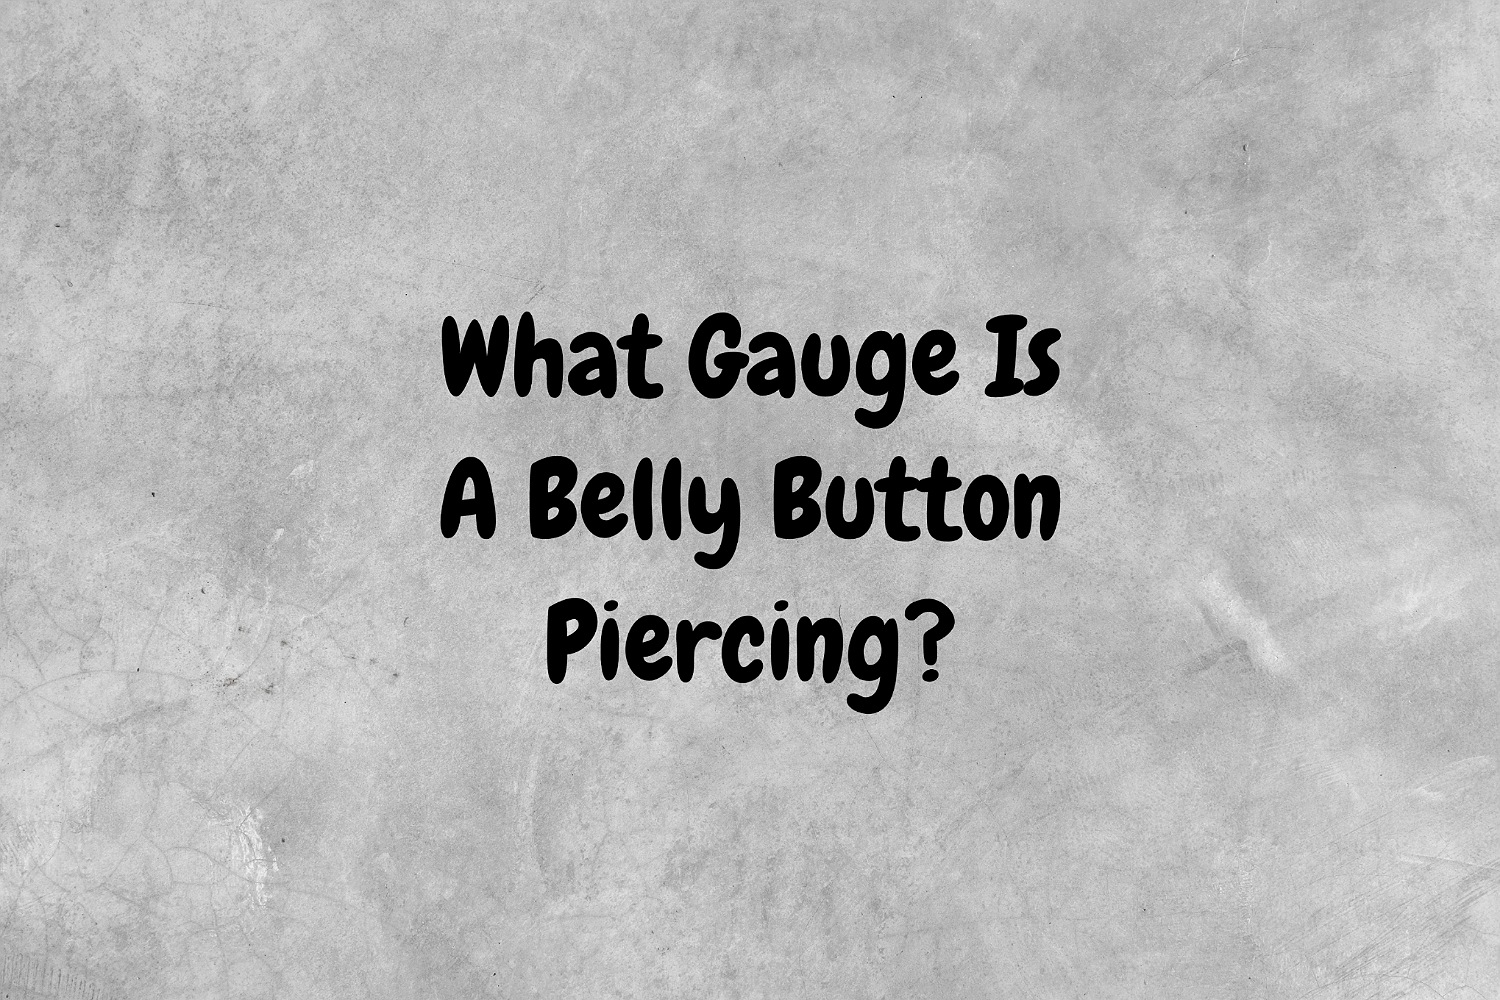 An image with a gray background that has black text proposing the question, "What Gauge Is A Belly Button Piercing?"